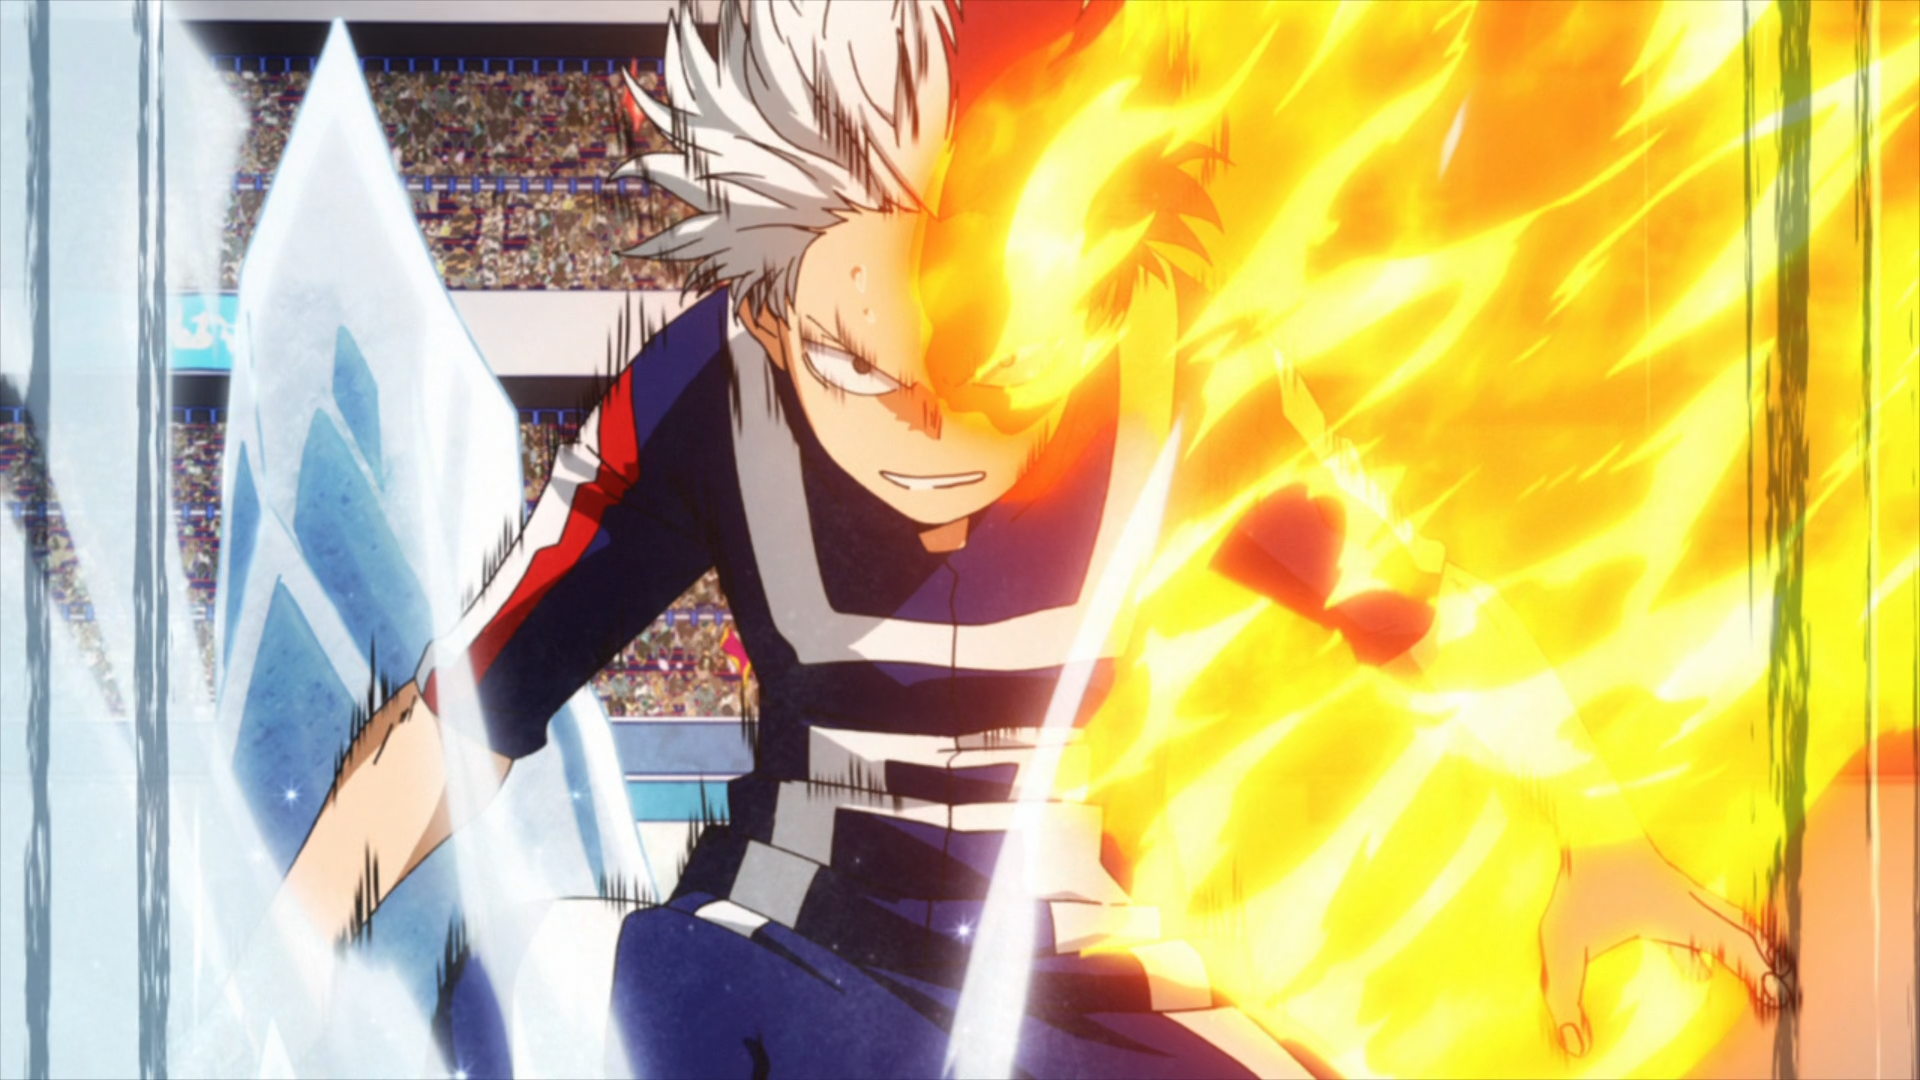 Who is the best fire user in anime? Why? (I think it's Todoroki because his  ice makes him way too op) - Quora